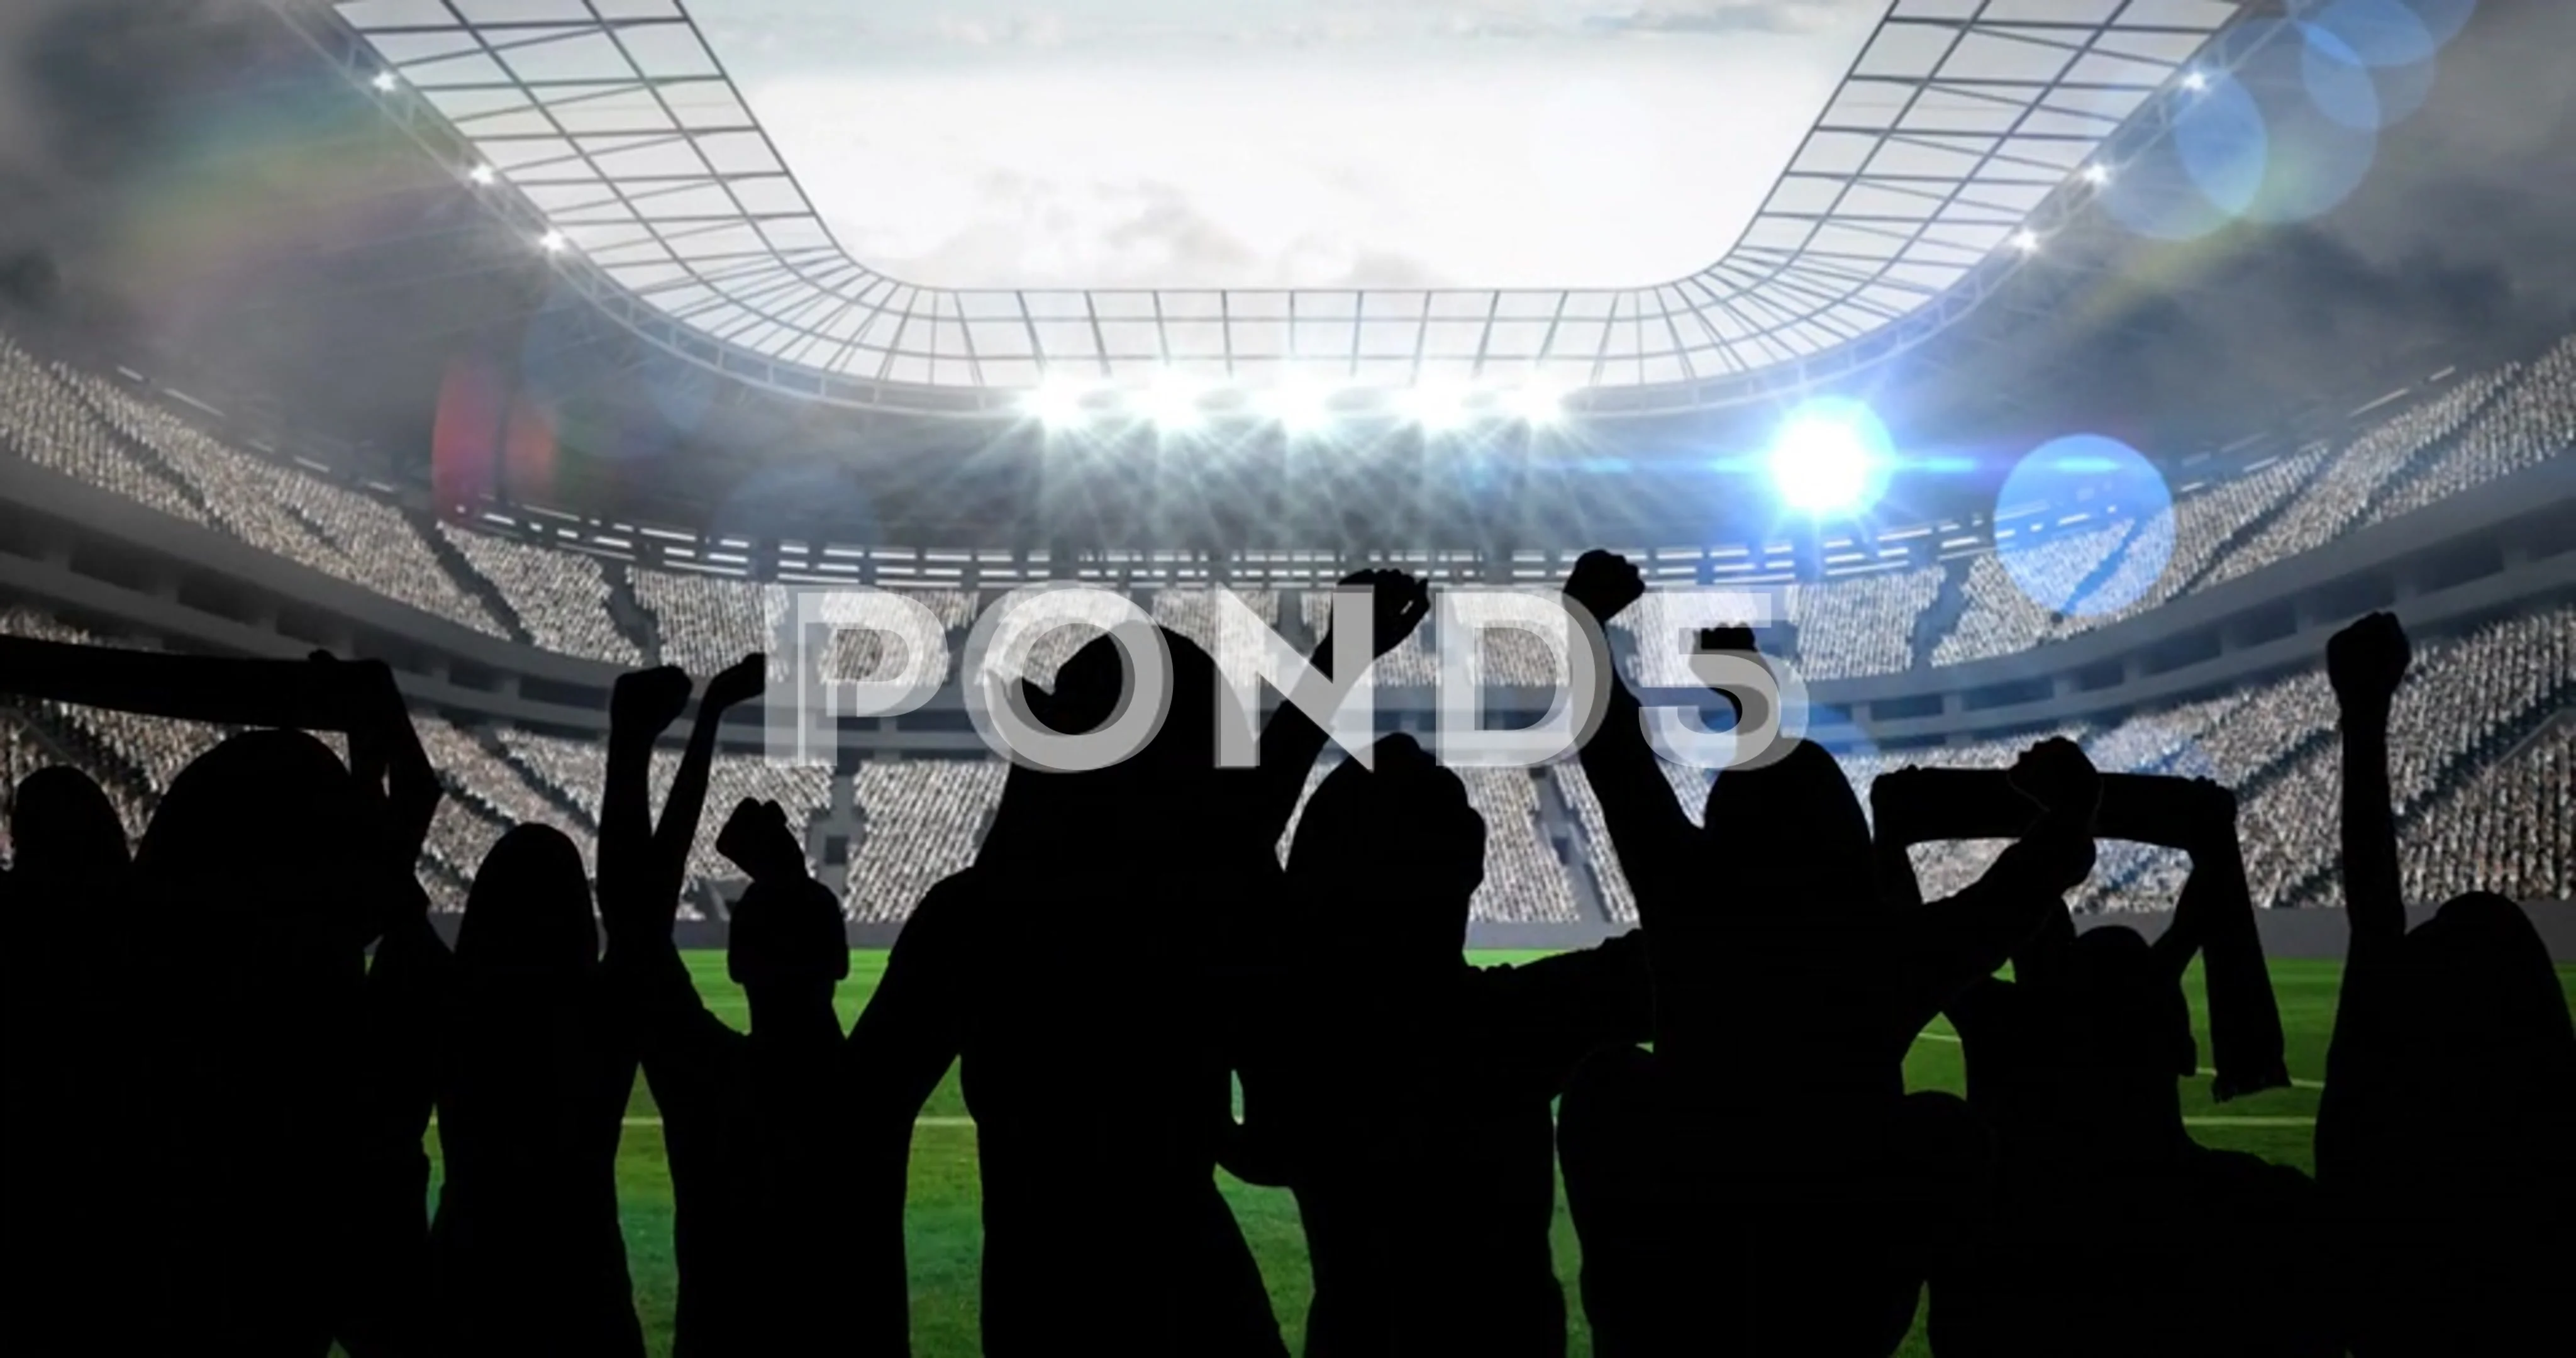 sports crowd silhouette